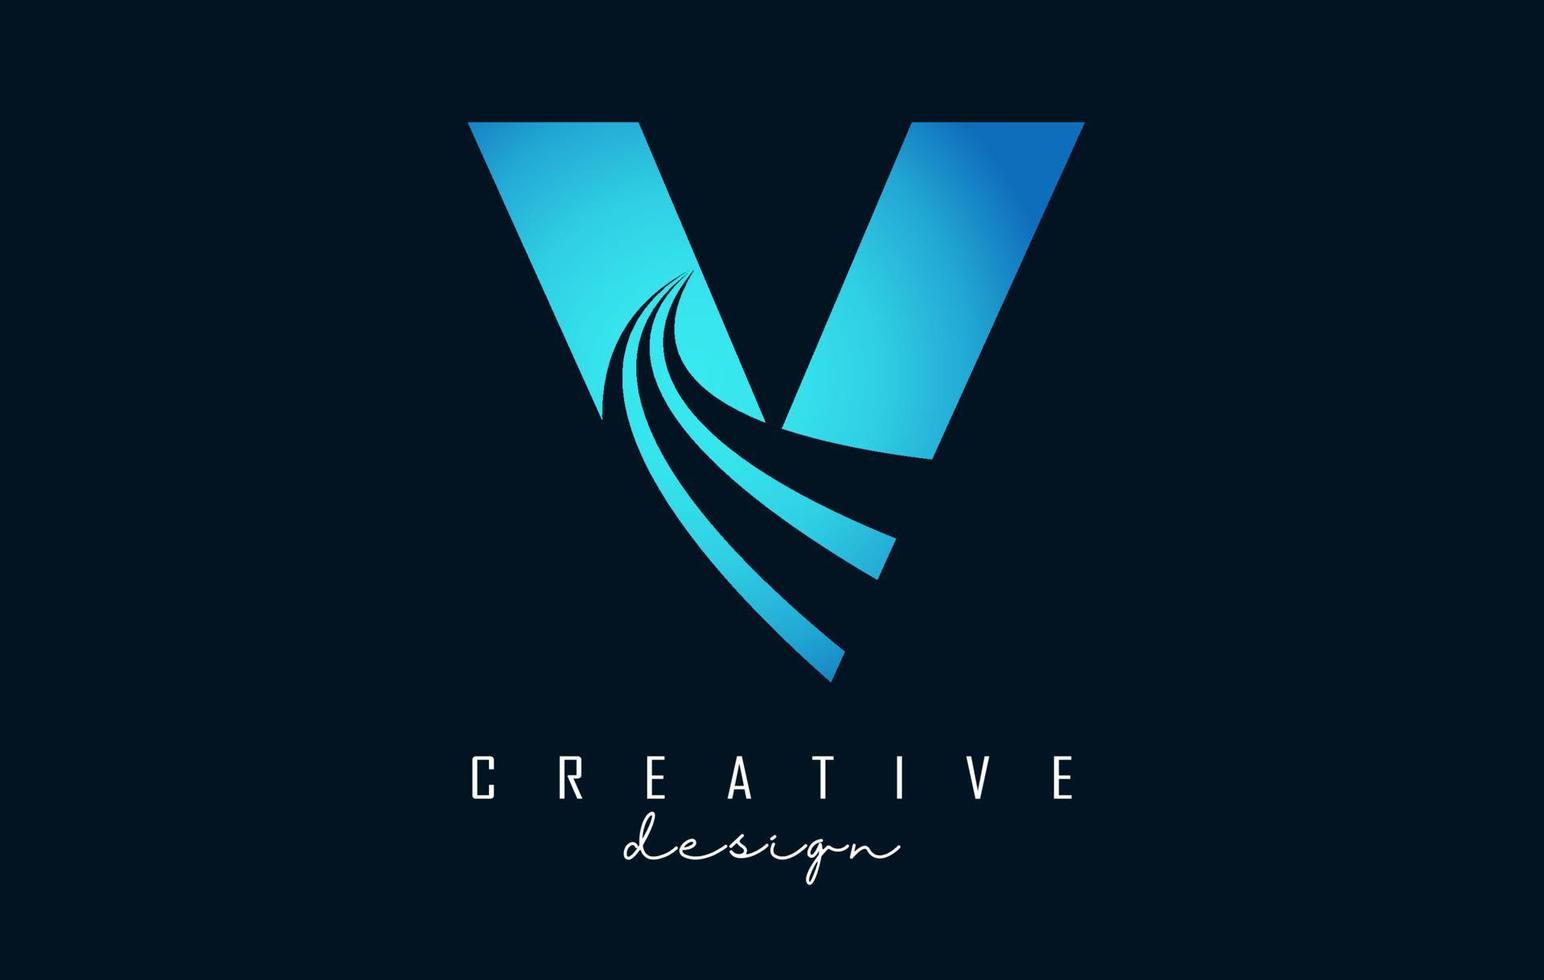 Creative letter V logo with leading lines and road concept design. Letter V with geometric design. vector